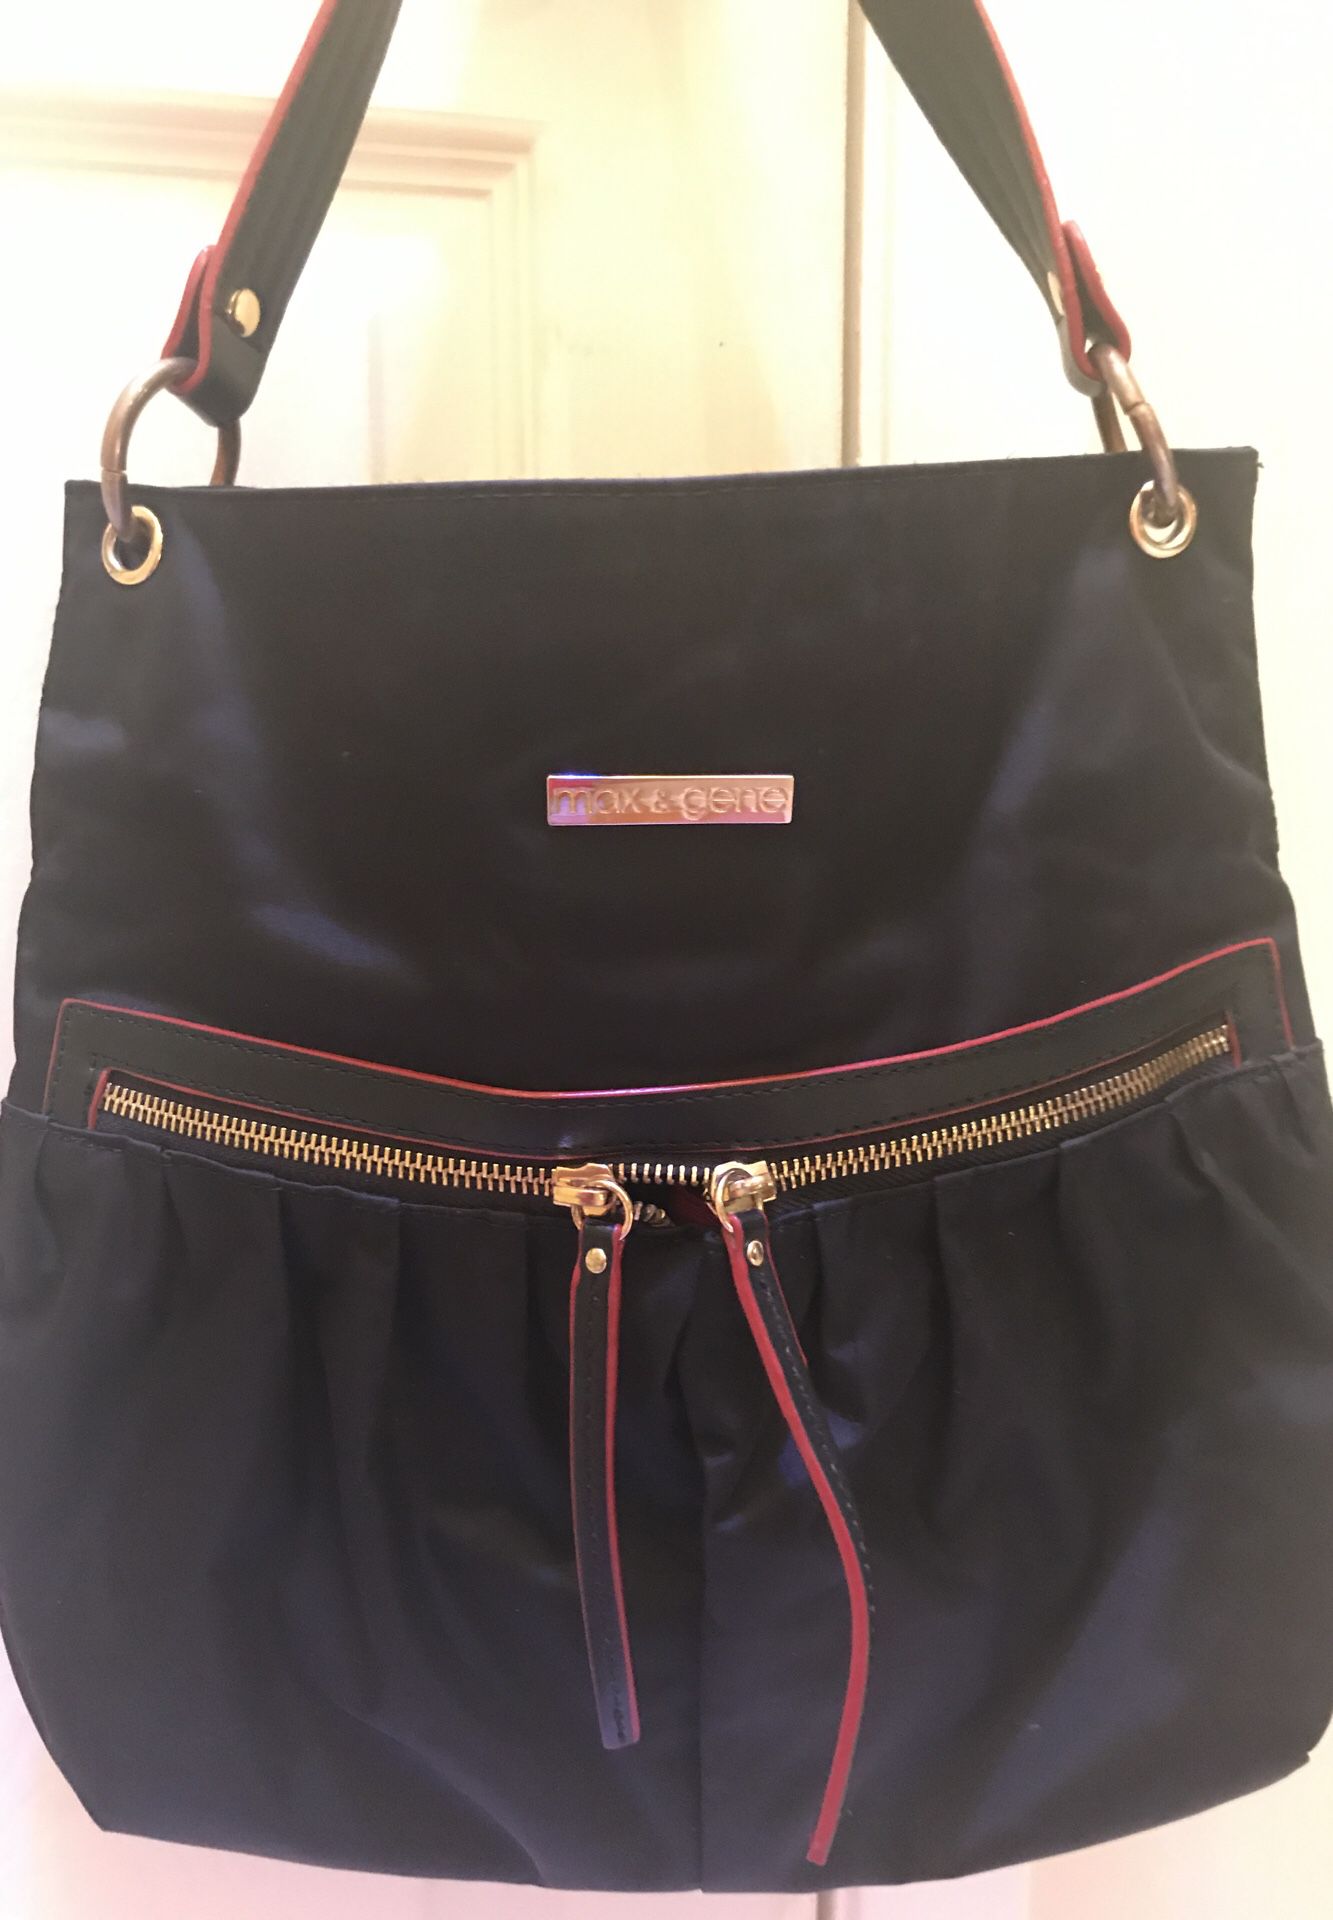 Crossi Purse (brand New) for Sale in Port St. Lucie, FL - OfferUp